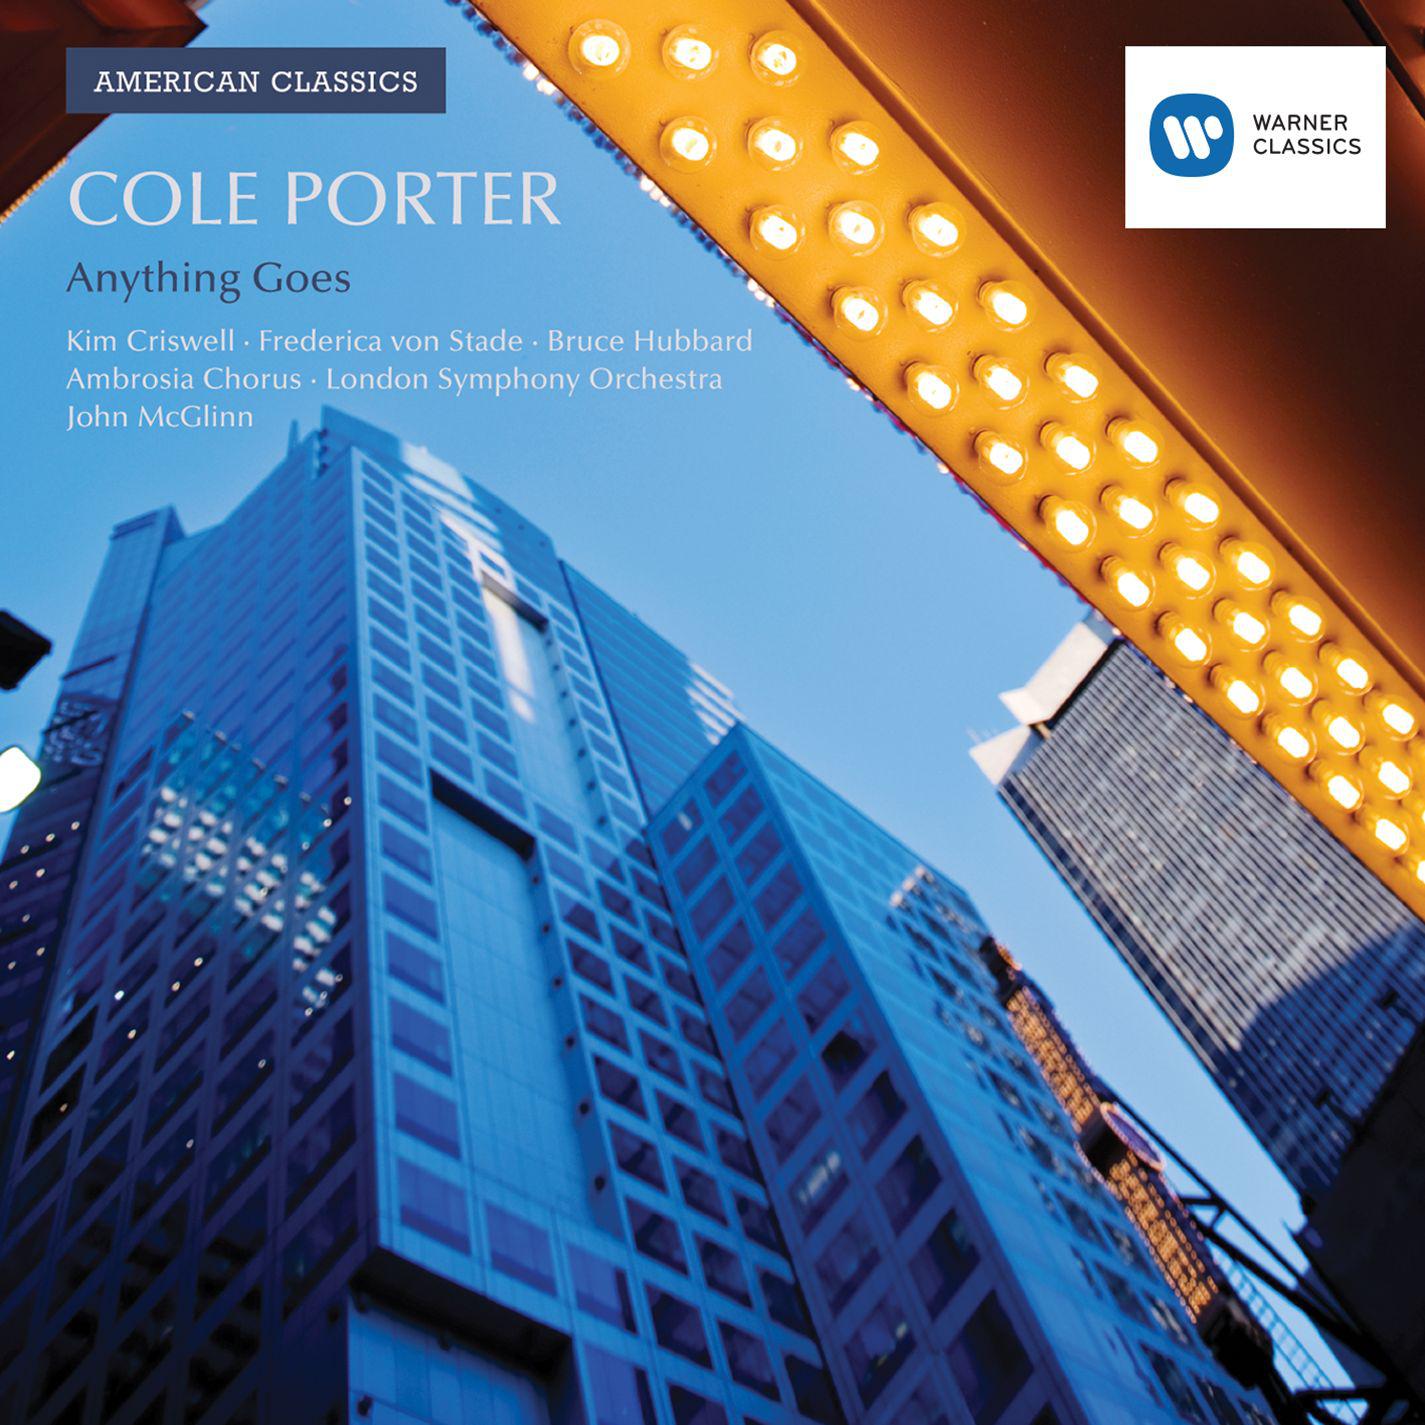 American Classics: Cole Porter - Anything Goes